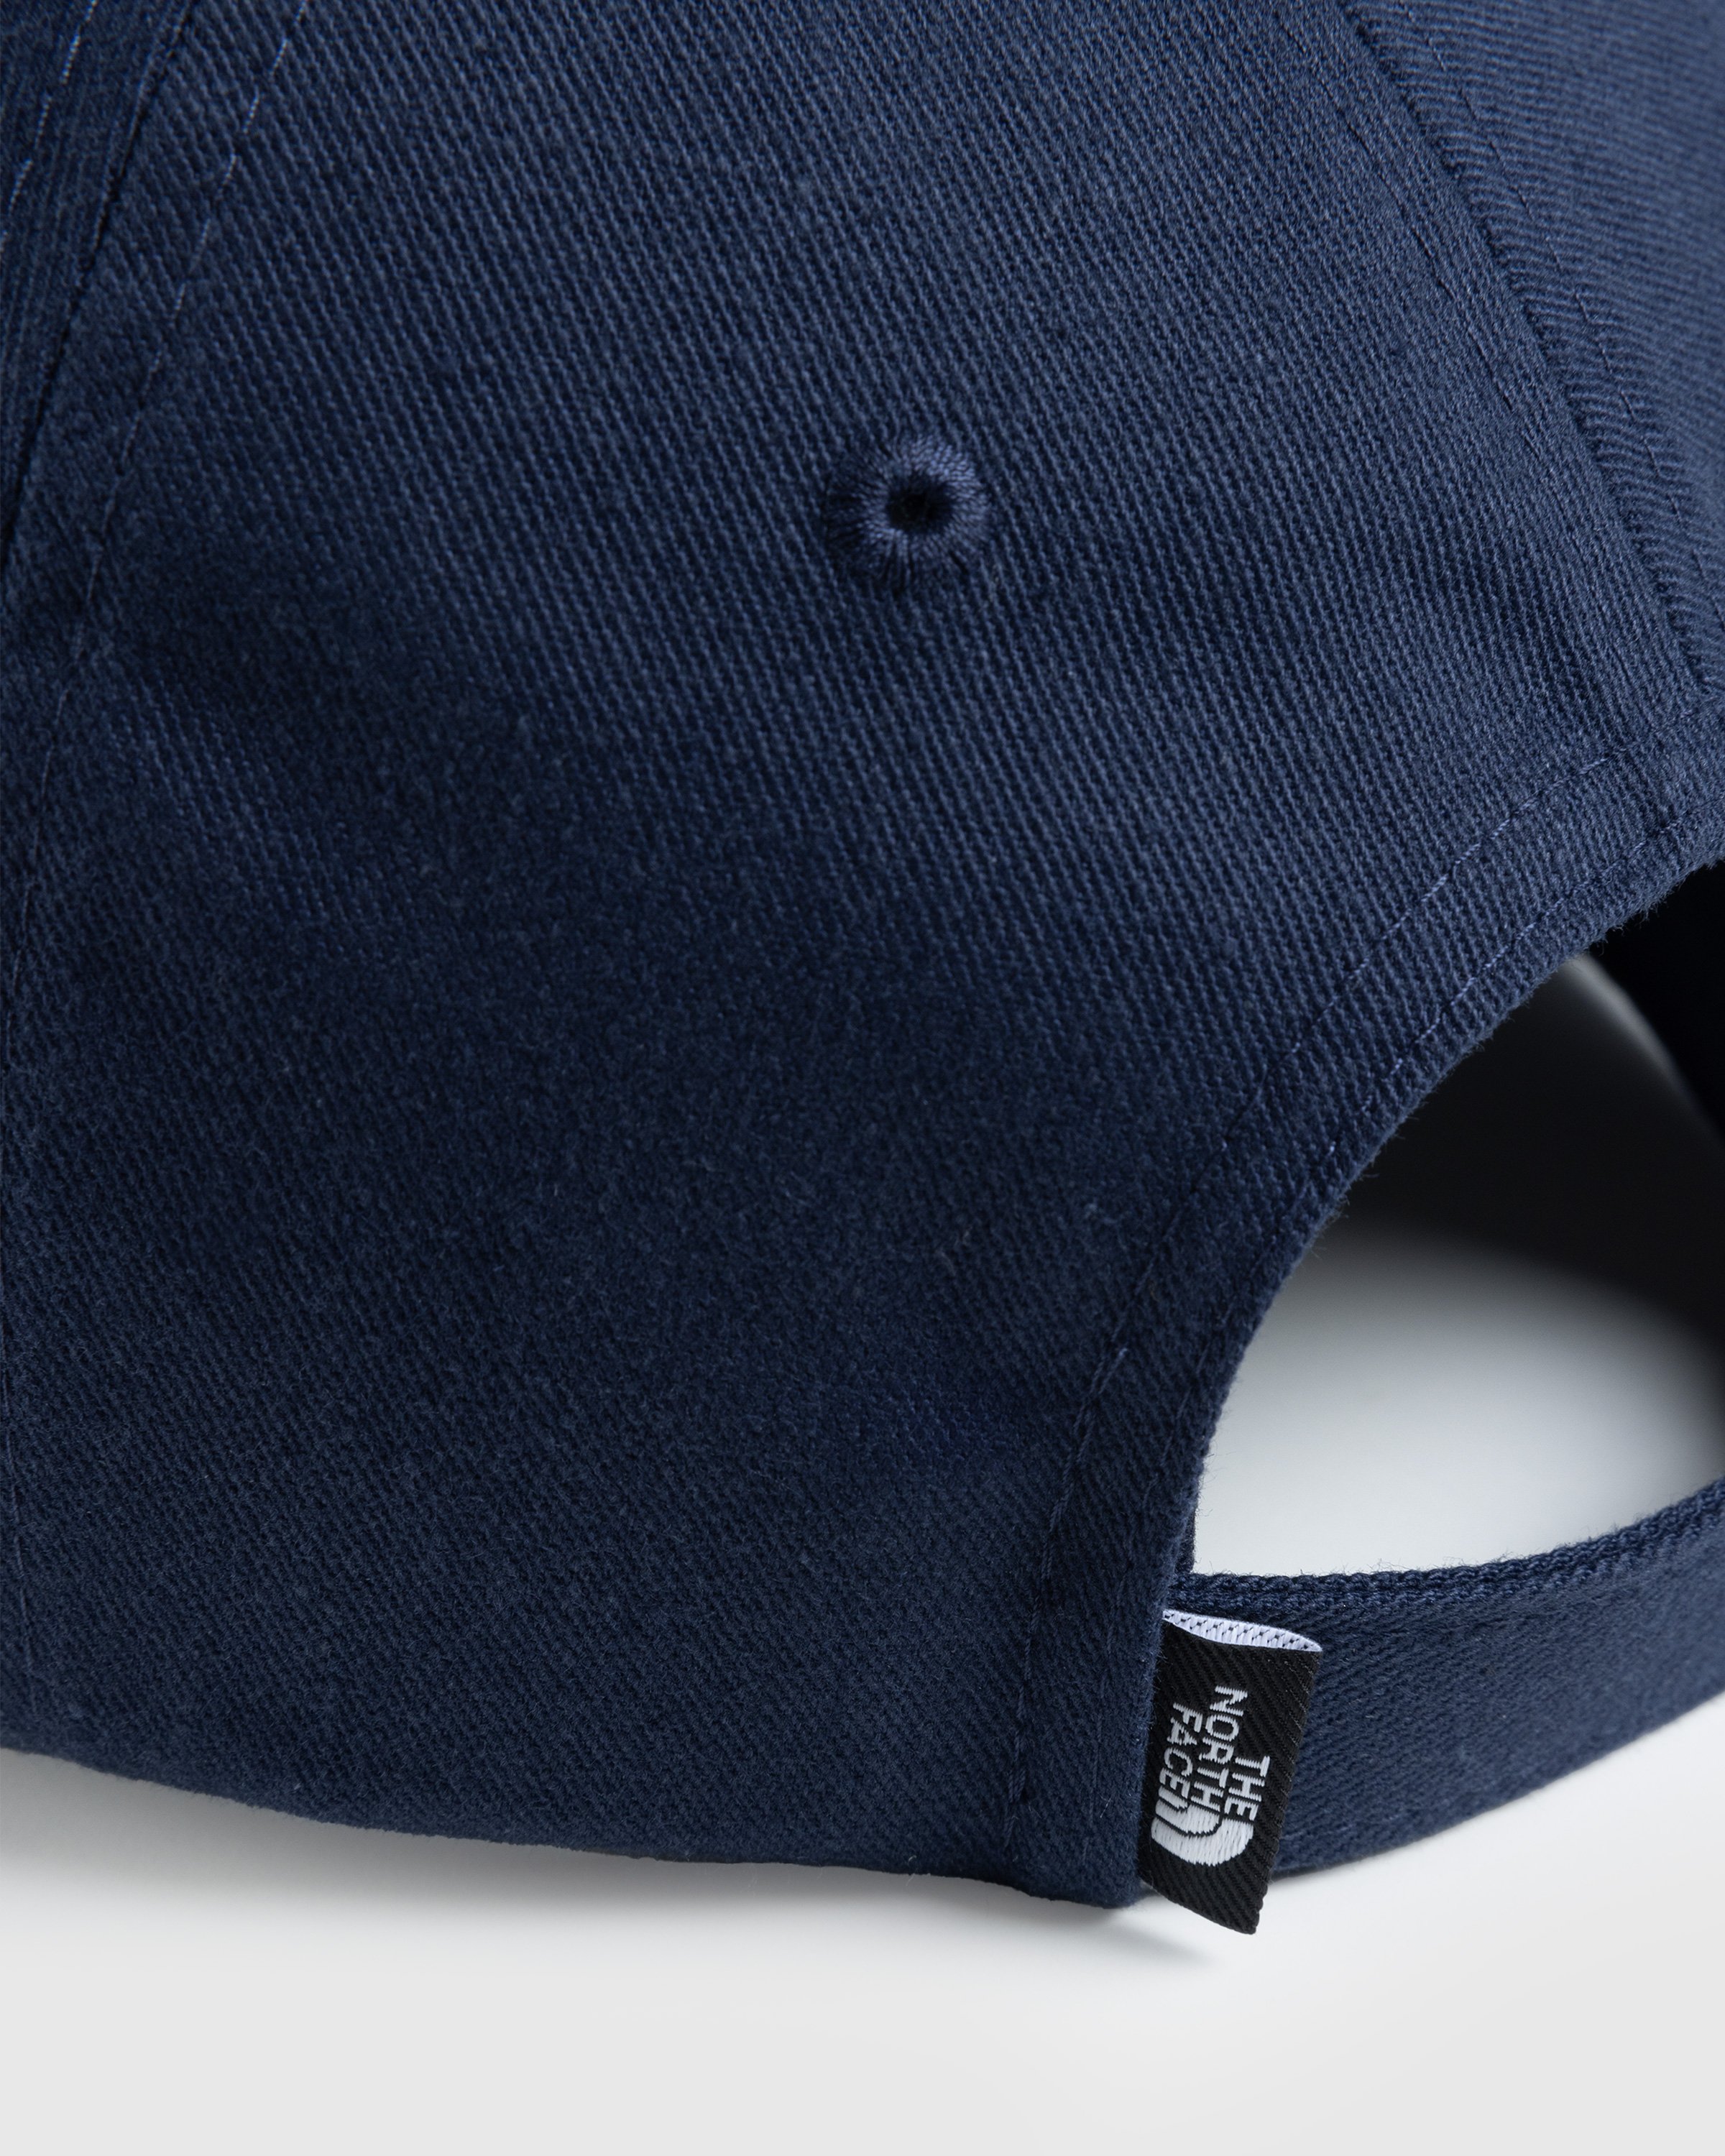 The North Face - NORM HAT SUMMIT NAVY - Accessories - Blue - Image 5